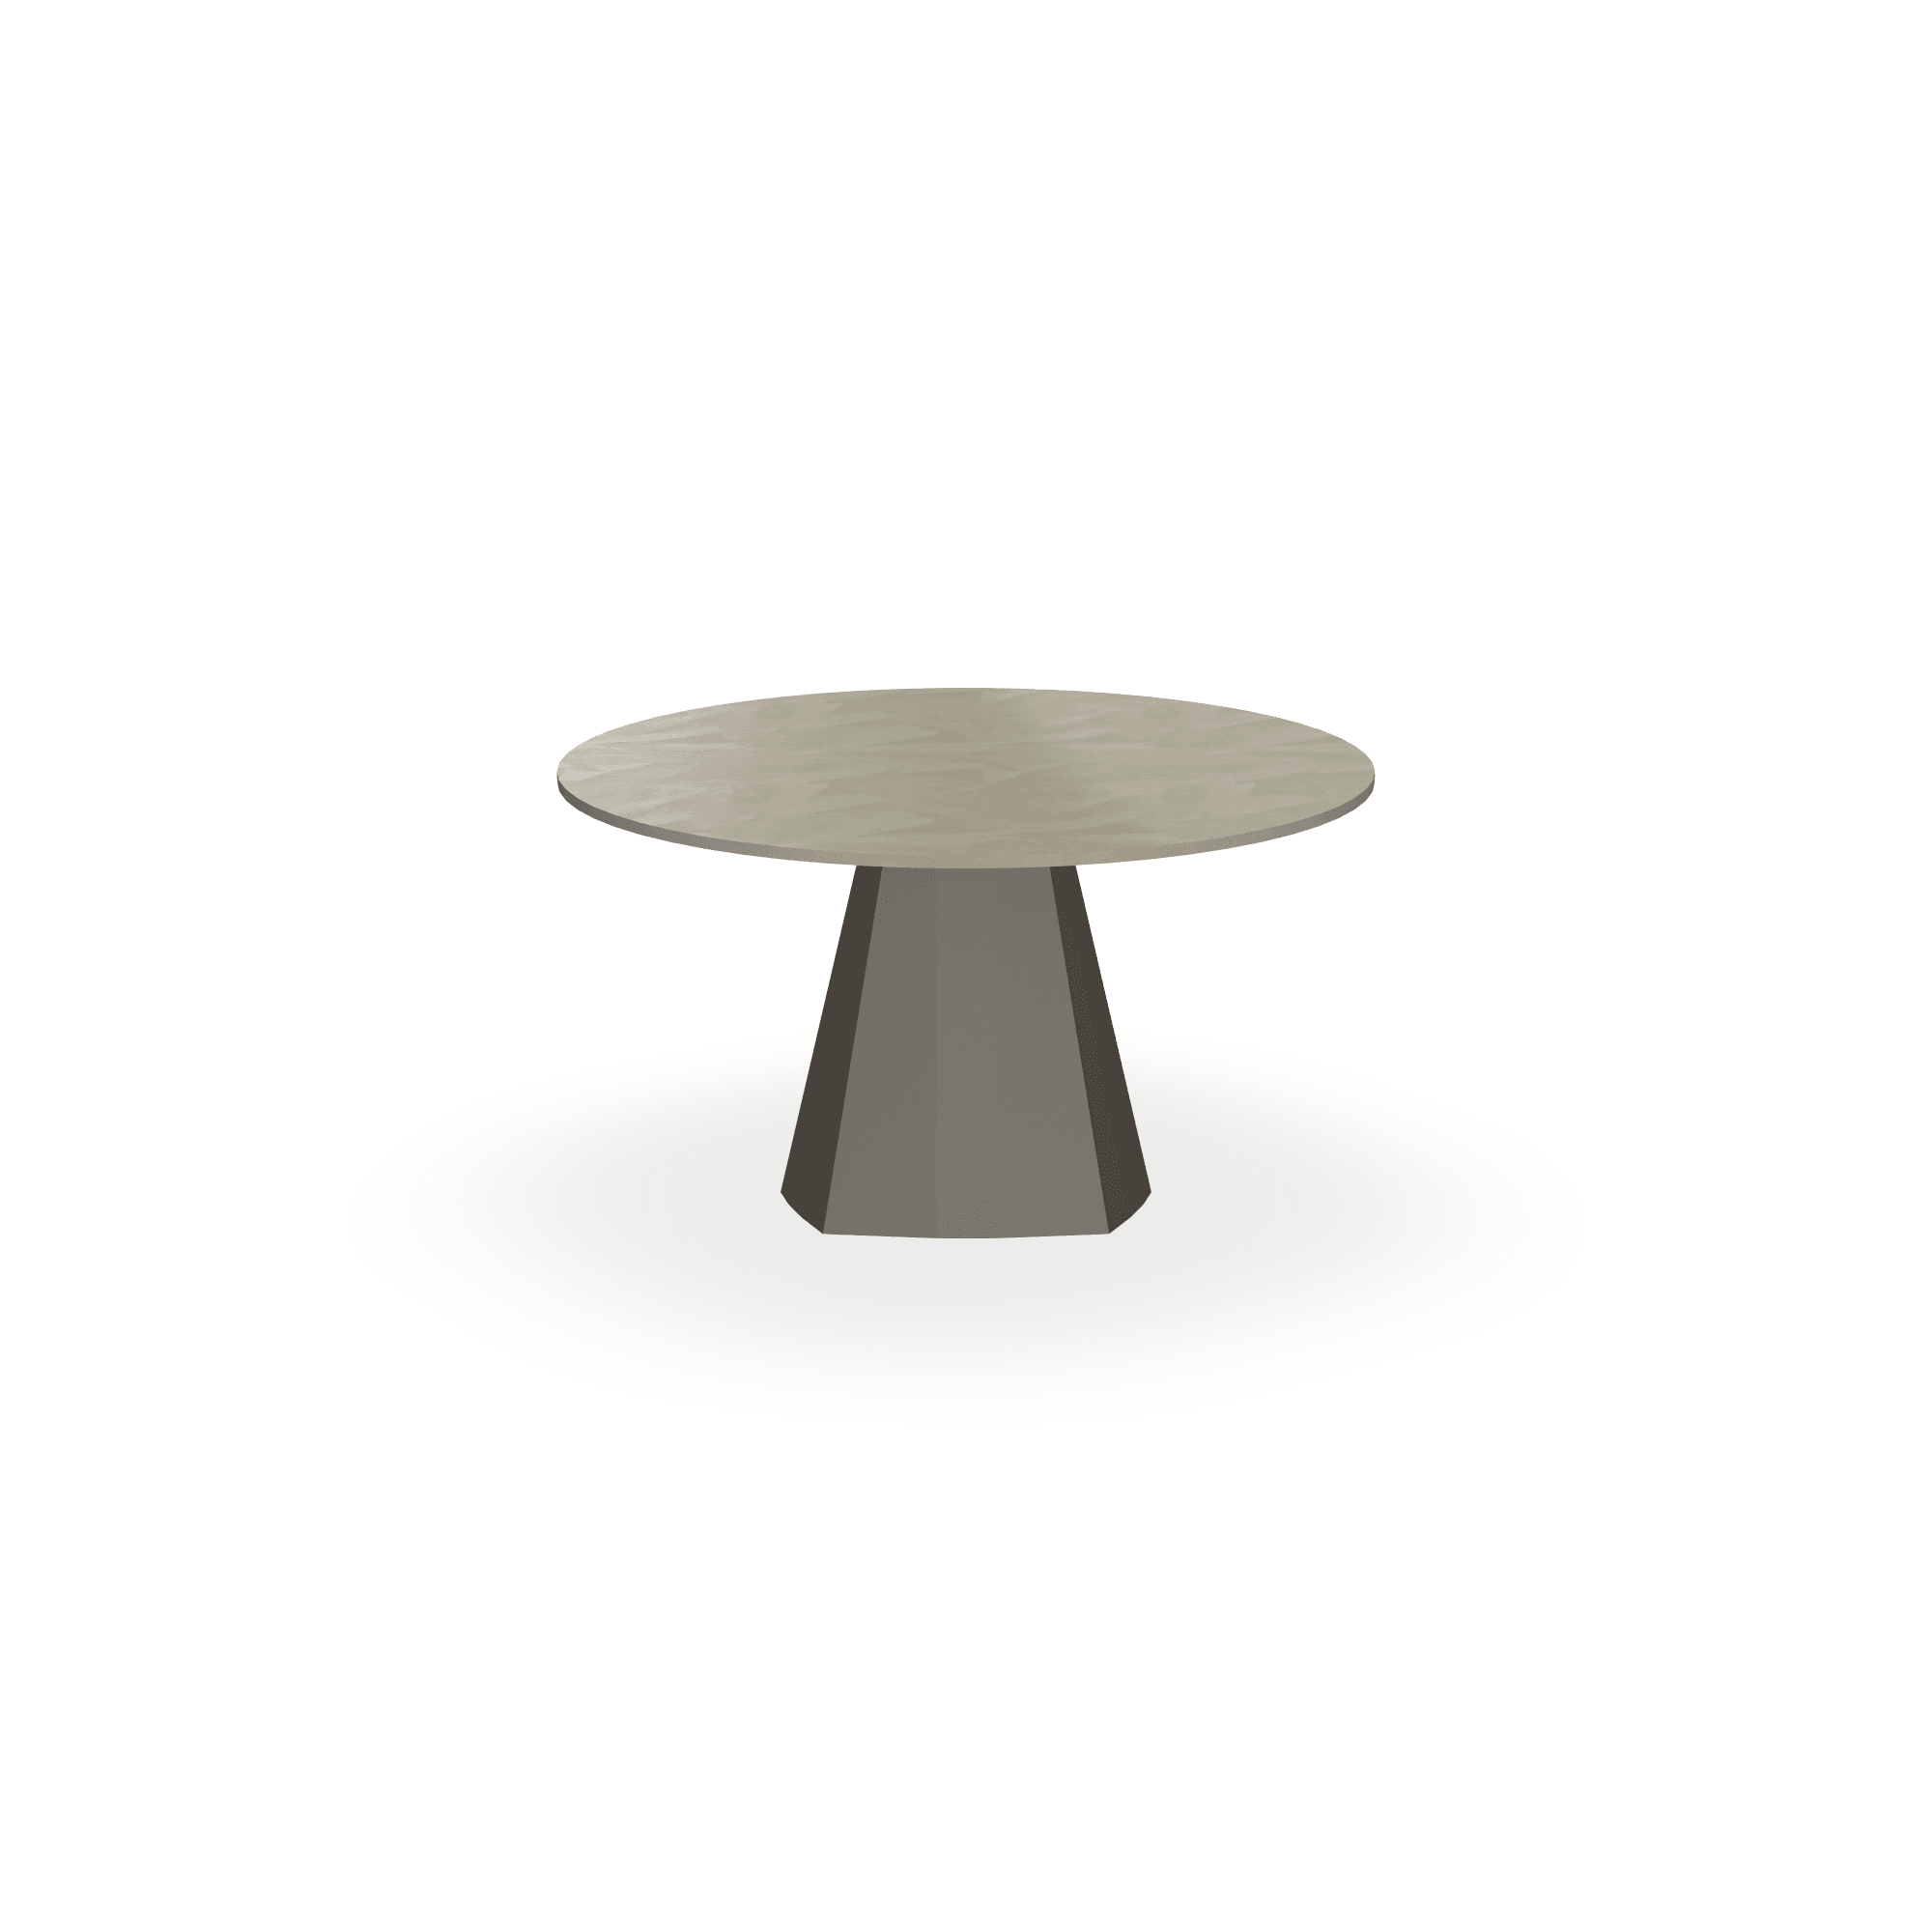 Eettafel Beton Leather Taupe - Rond - Cone Onderstel Mat Donkerbruin - {{ product.type }} - Kas20